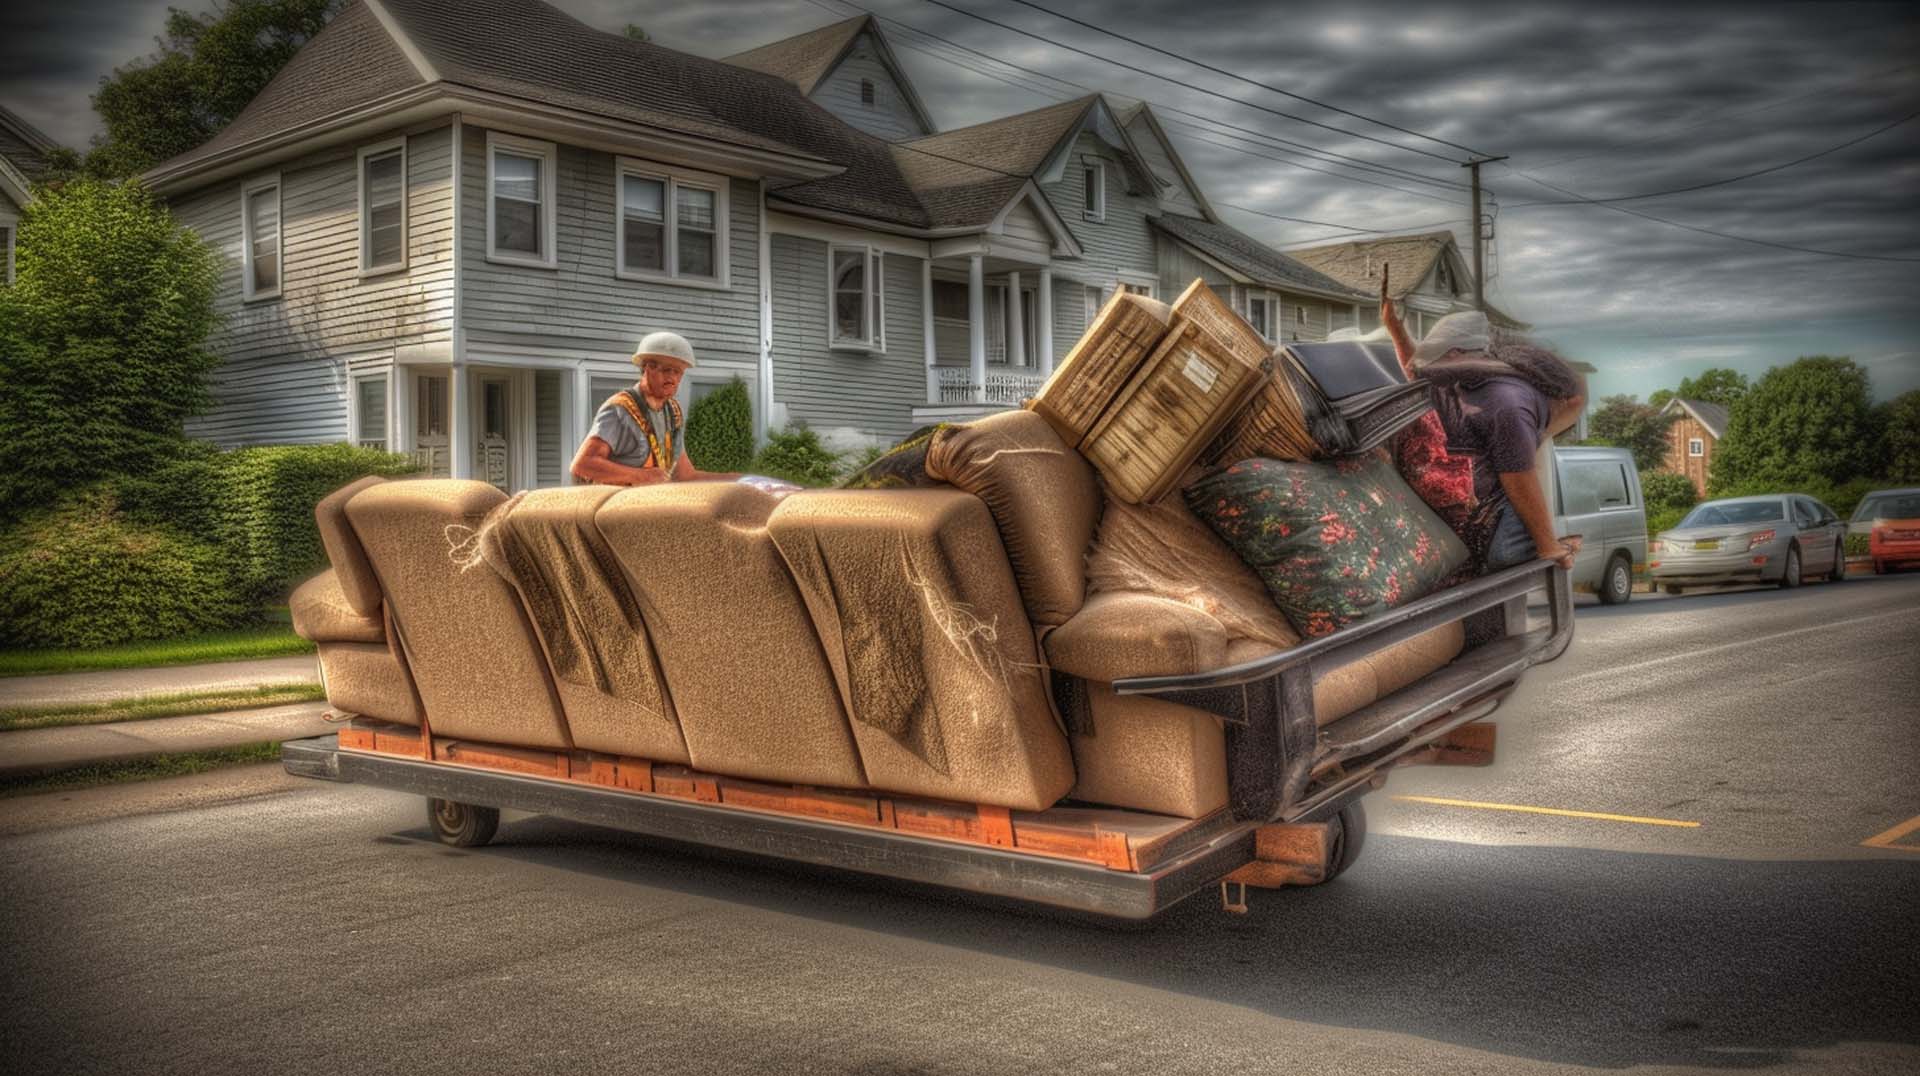 Residential Junk Removal Services in Woodbridge